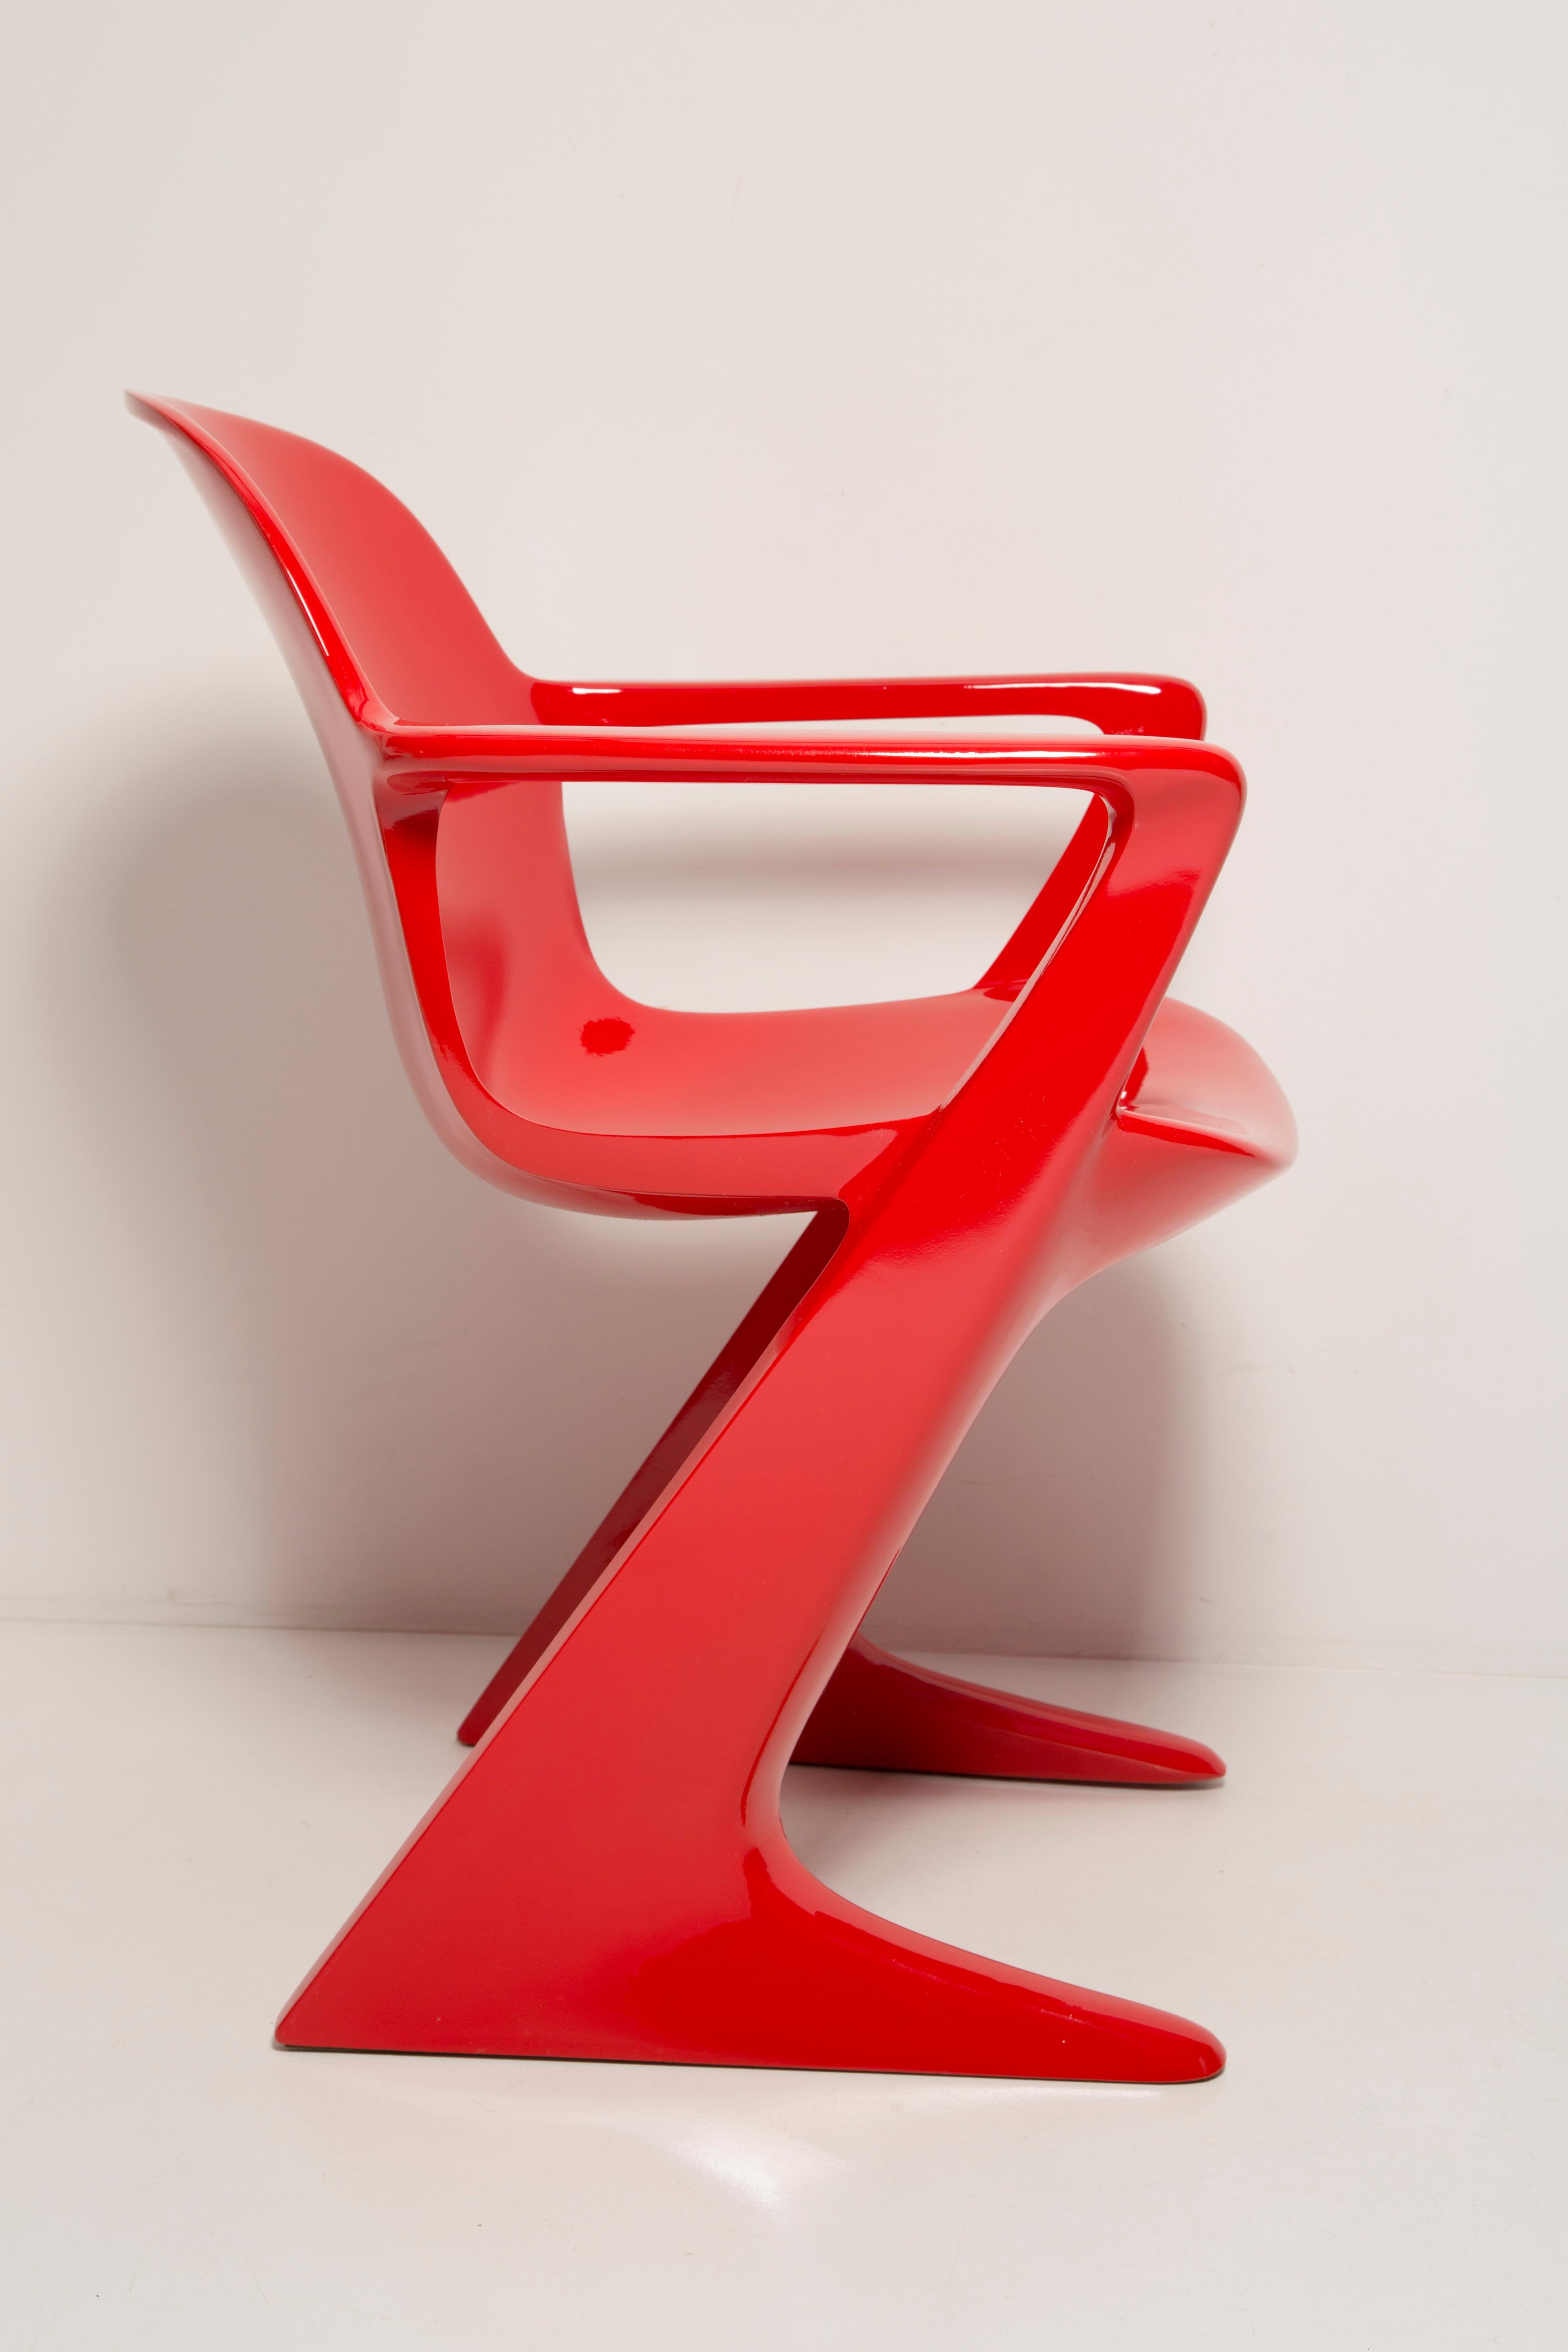 Fiberglass Midcentury Signal Red Kangaroo Chair Designed by Ernst Moeckl, Germany, 1968 For Sale